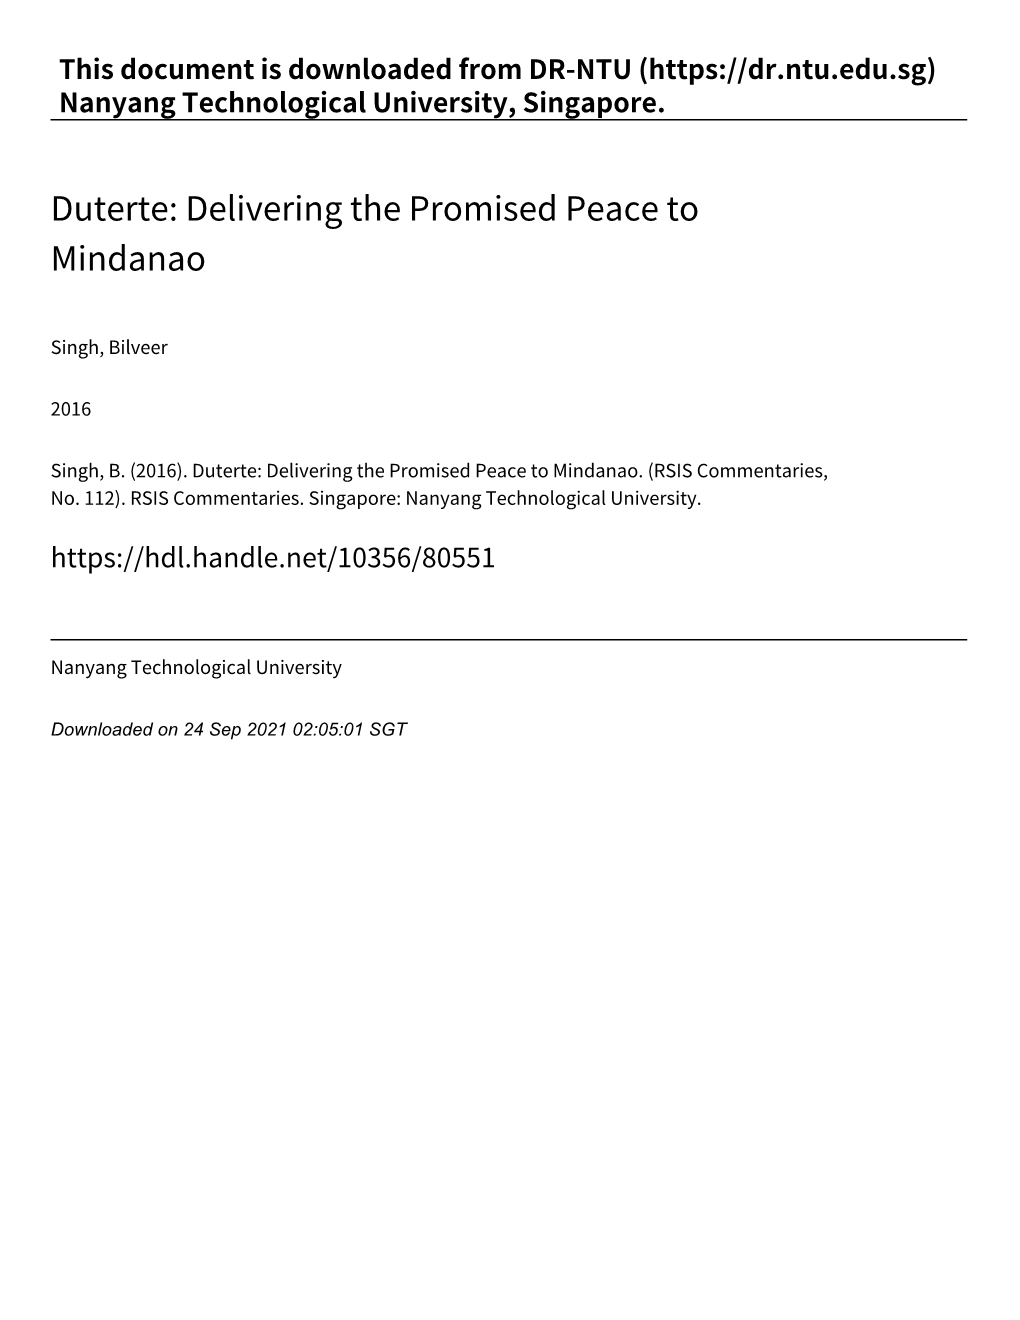 Duterte: Delivering the Promised Peace to Mindanao